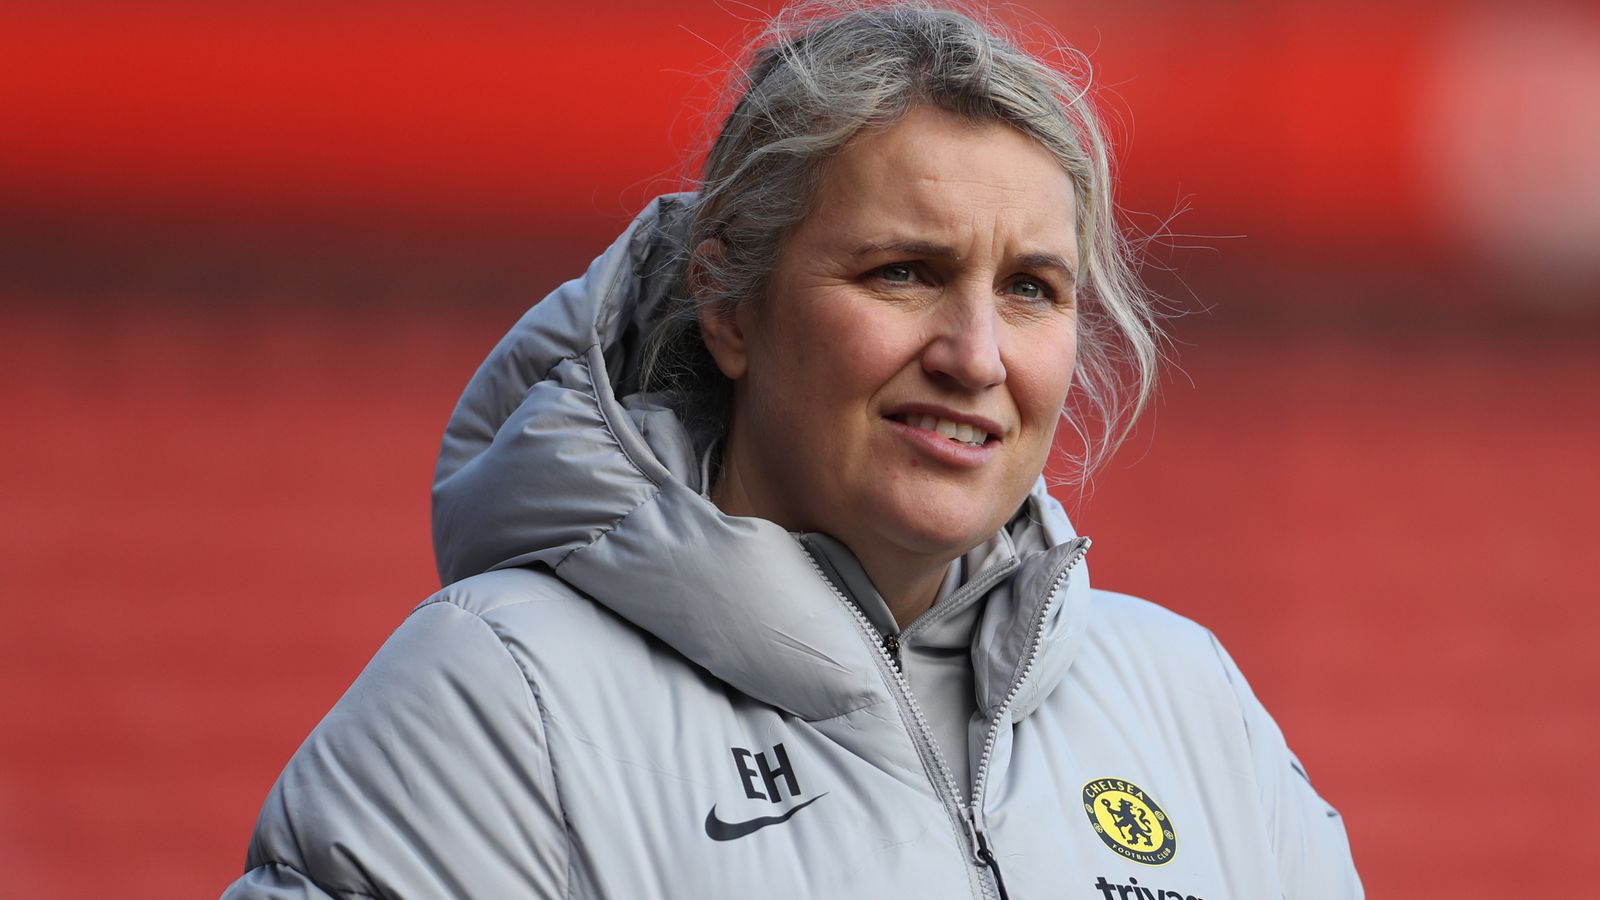 Chelsea manager Emma Hayes praised for her ‘forward-thinking’ approach to managing menstrual cycles in sport